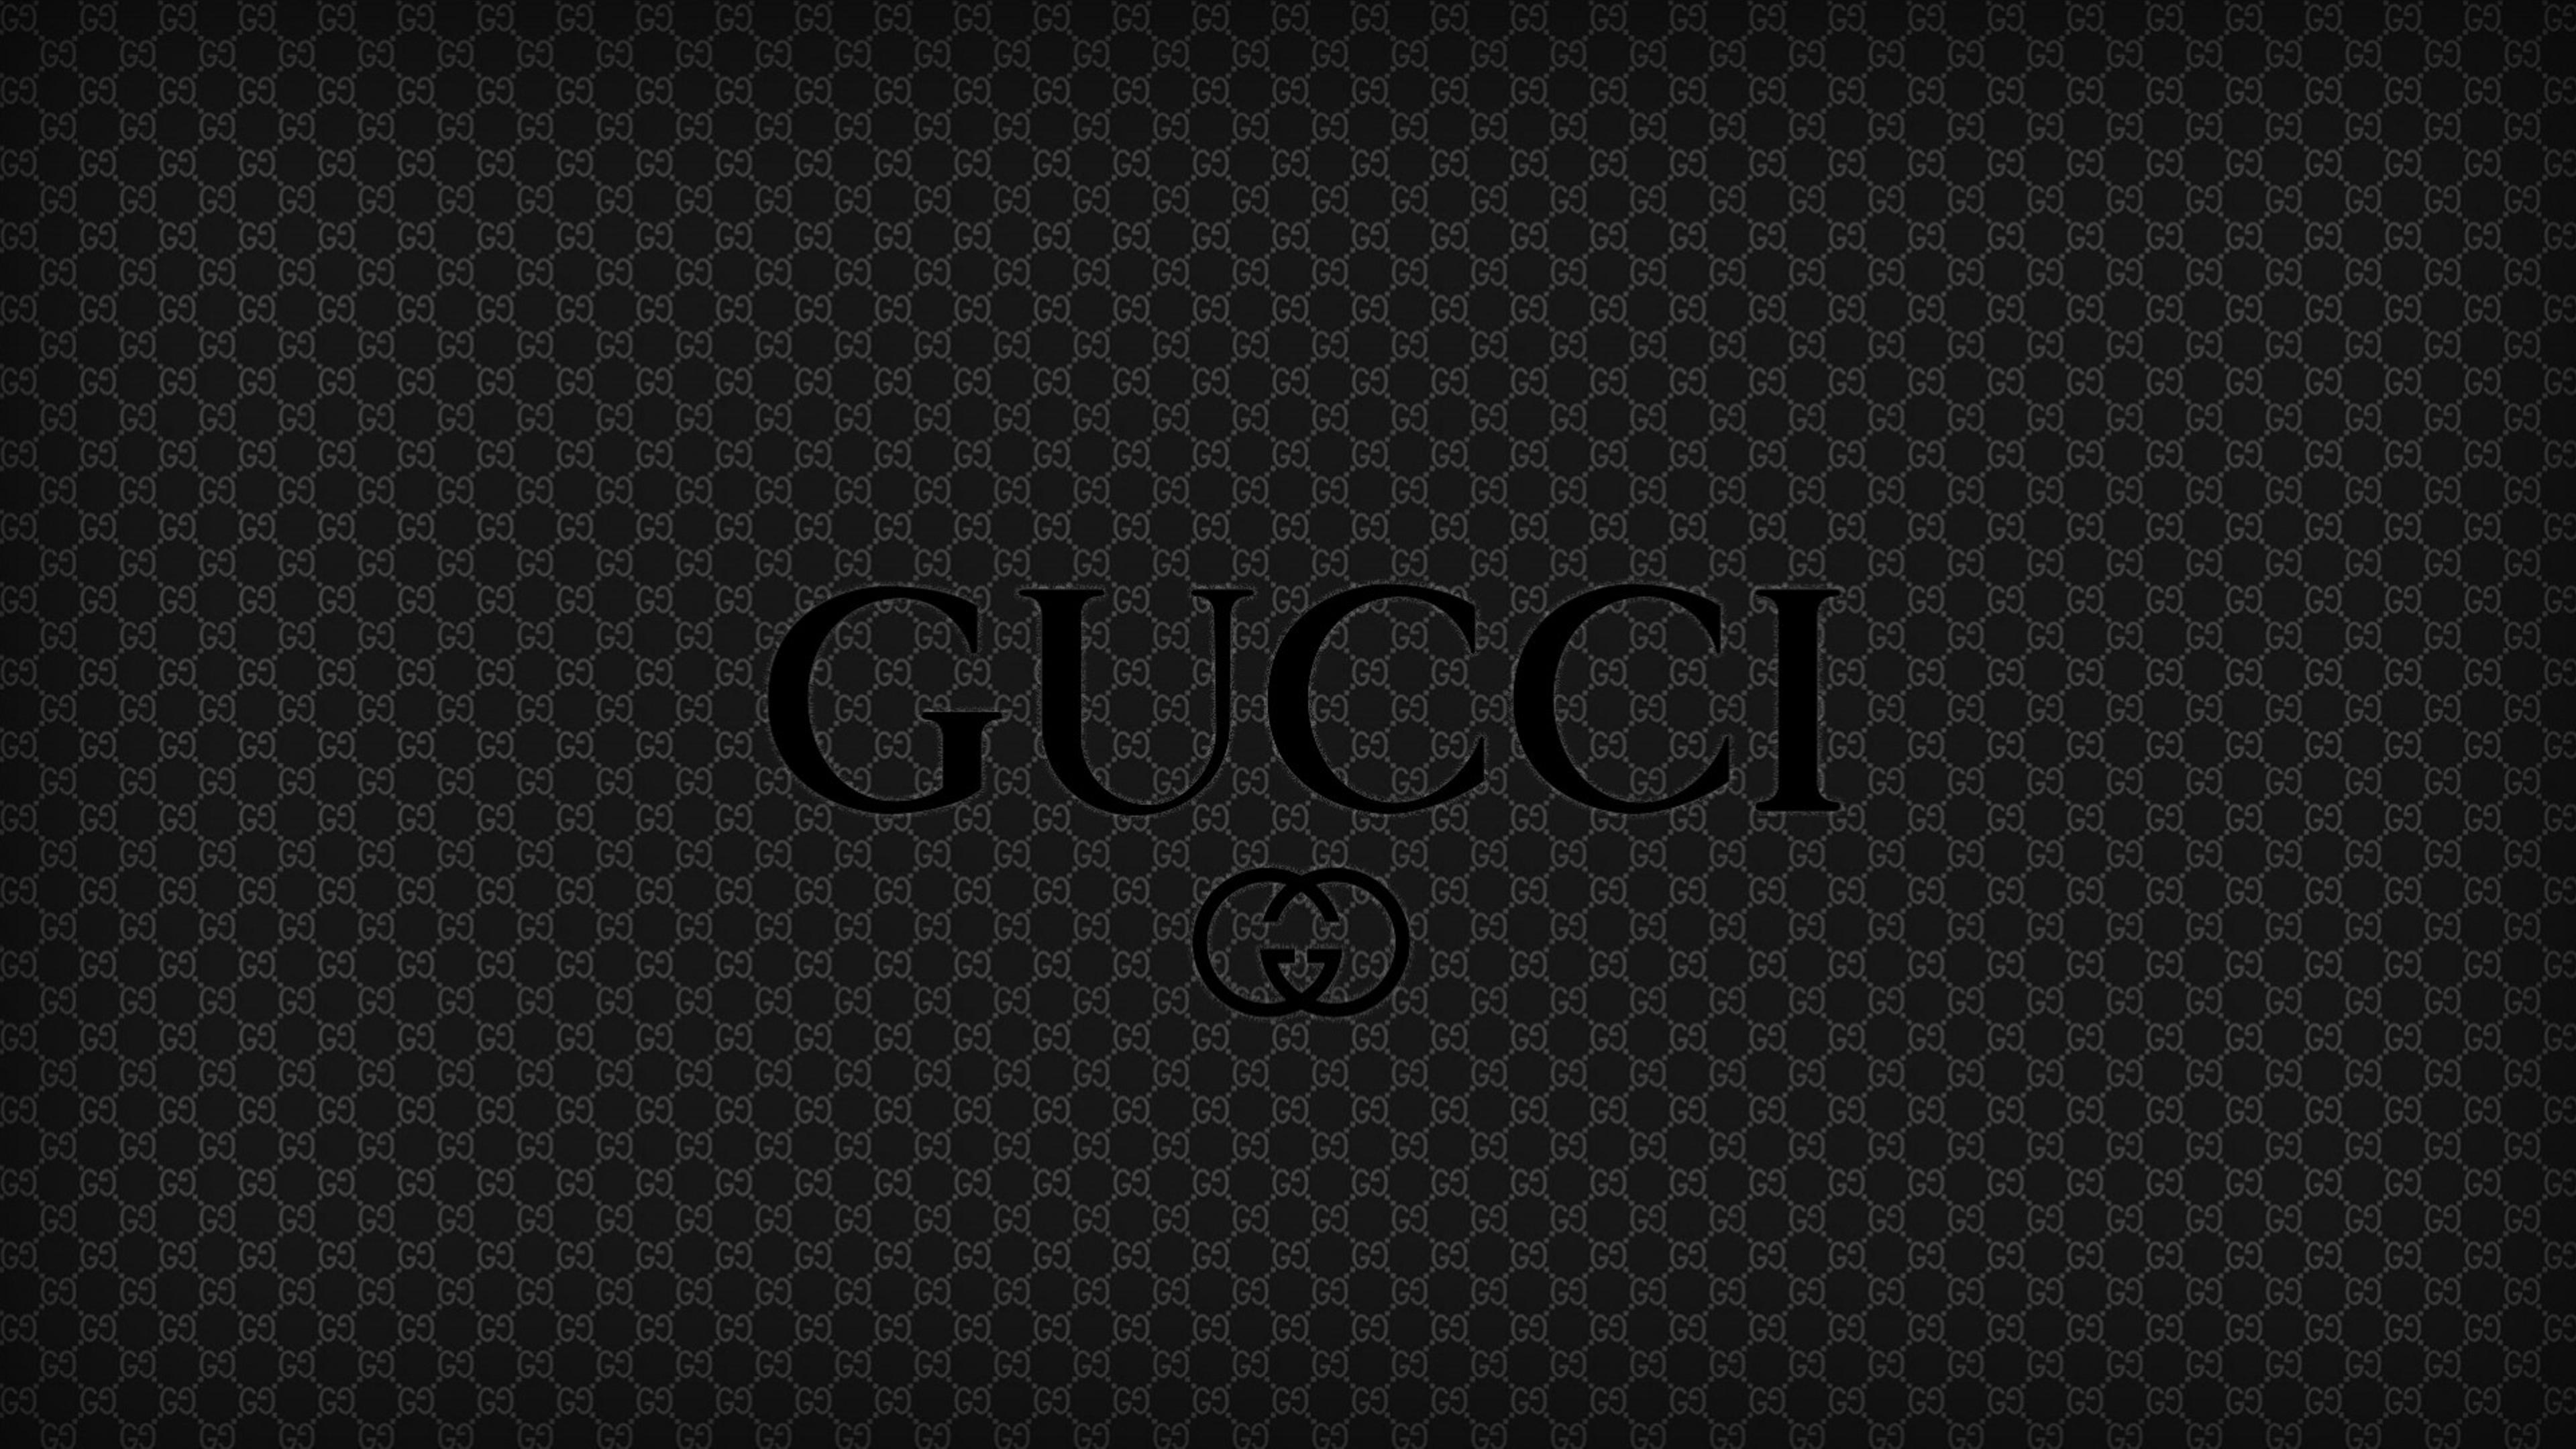 Black Gucci HD Wallpapers - Top Free Black Gucci HD Backgrounds ...